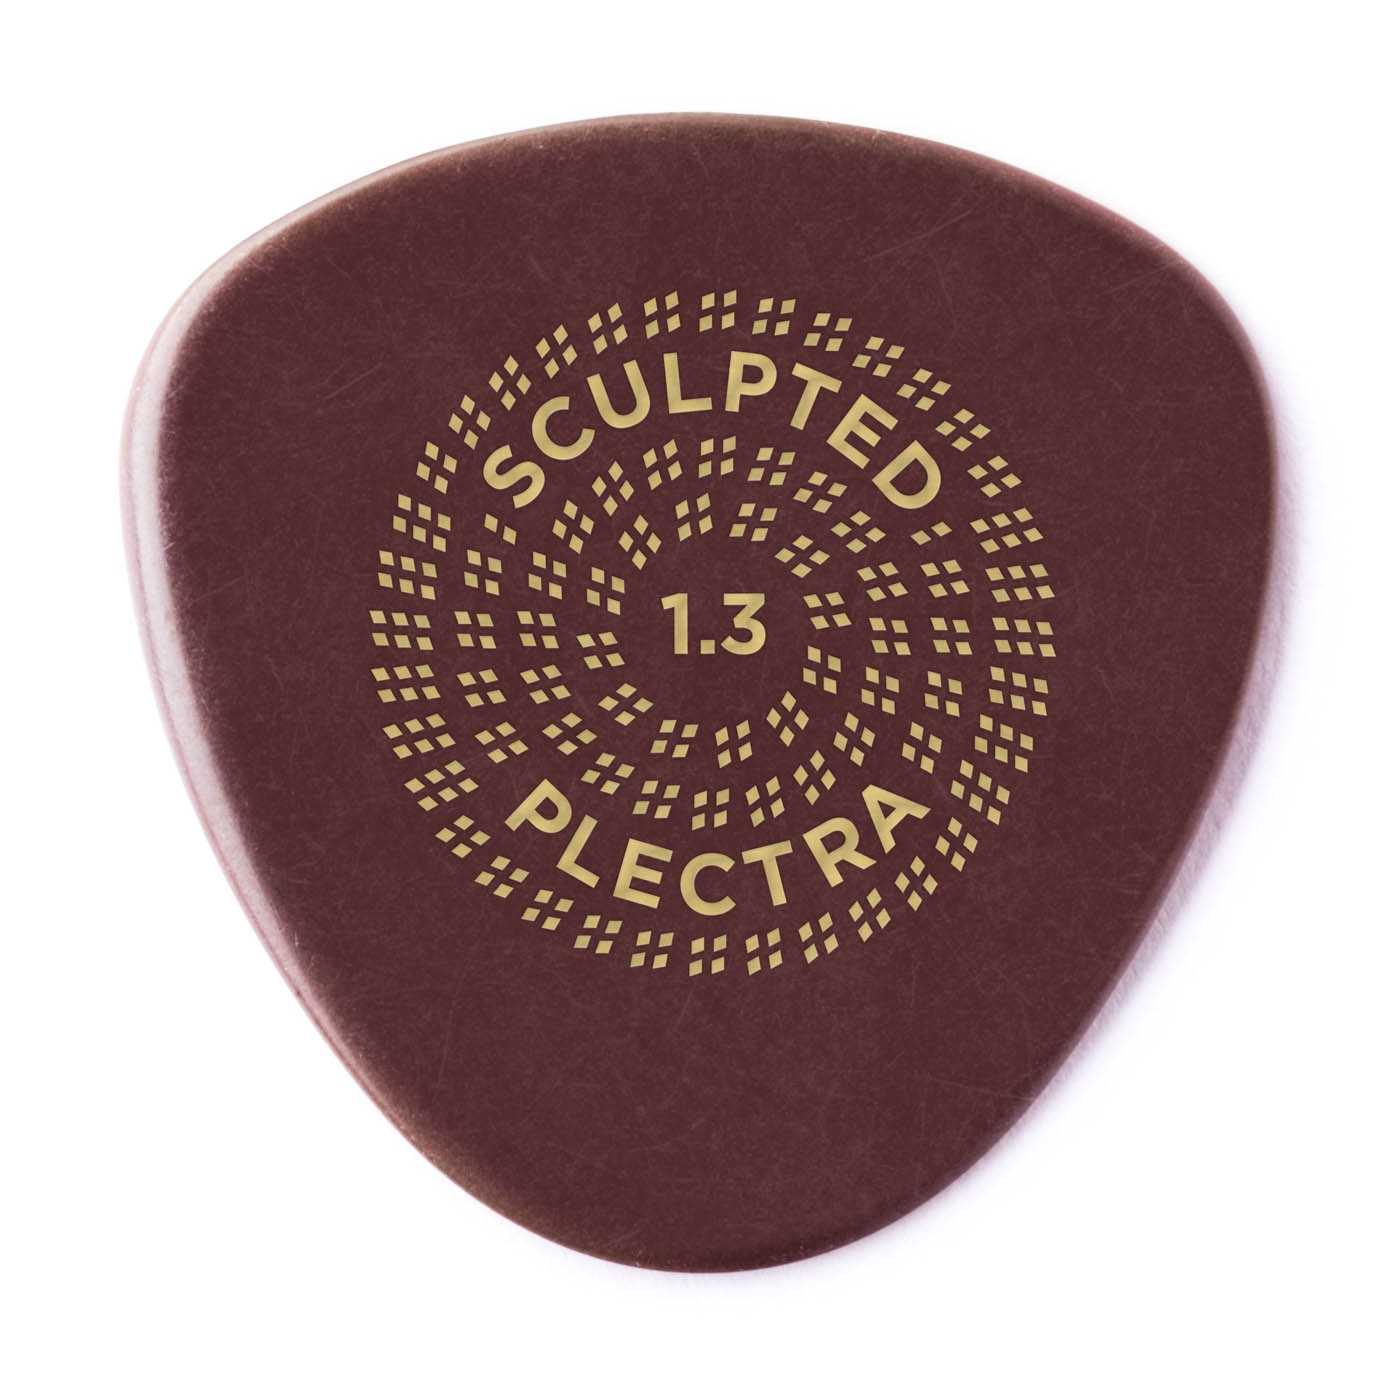 Back of Dunlop Primetone Sculpted Plectra, Ultex Semi Round, 1.30MM Thick, Three Pack